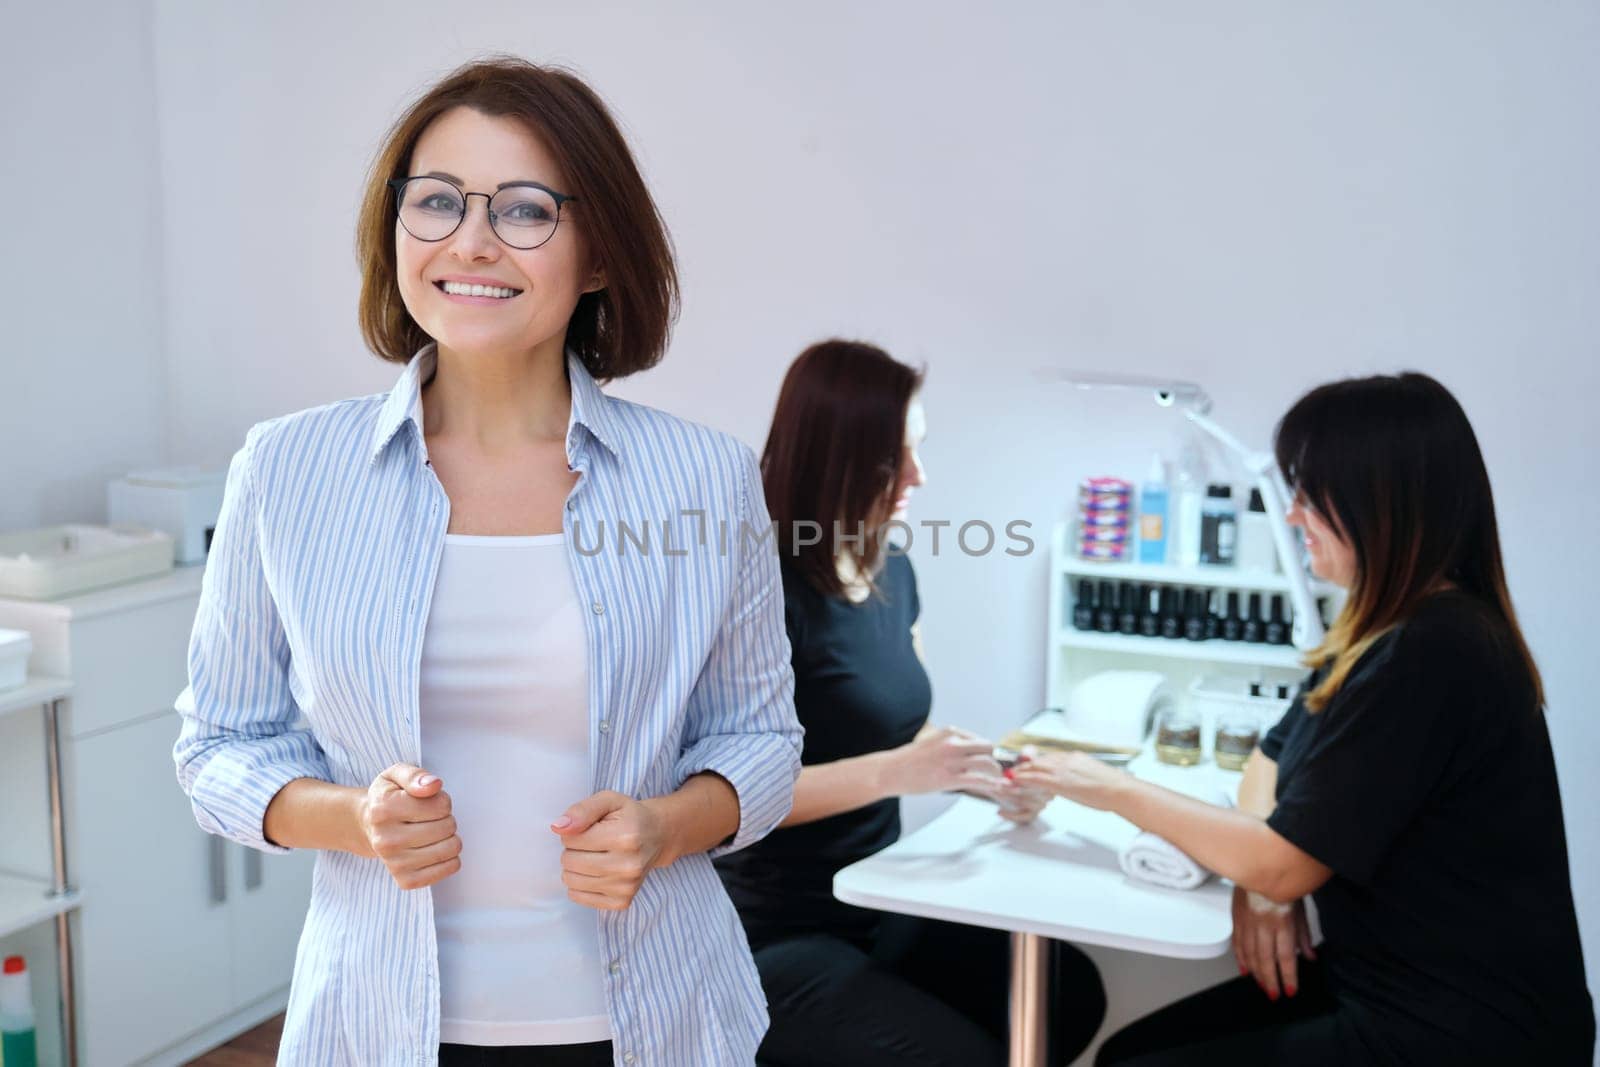 Confident mature woman beauty salon owner taking care of body with hands nails. Smiling female looking at the camera, manicure process background